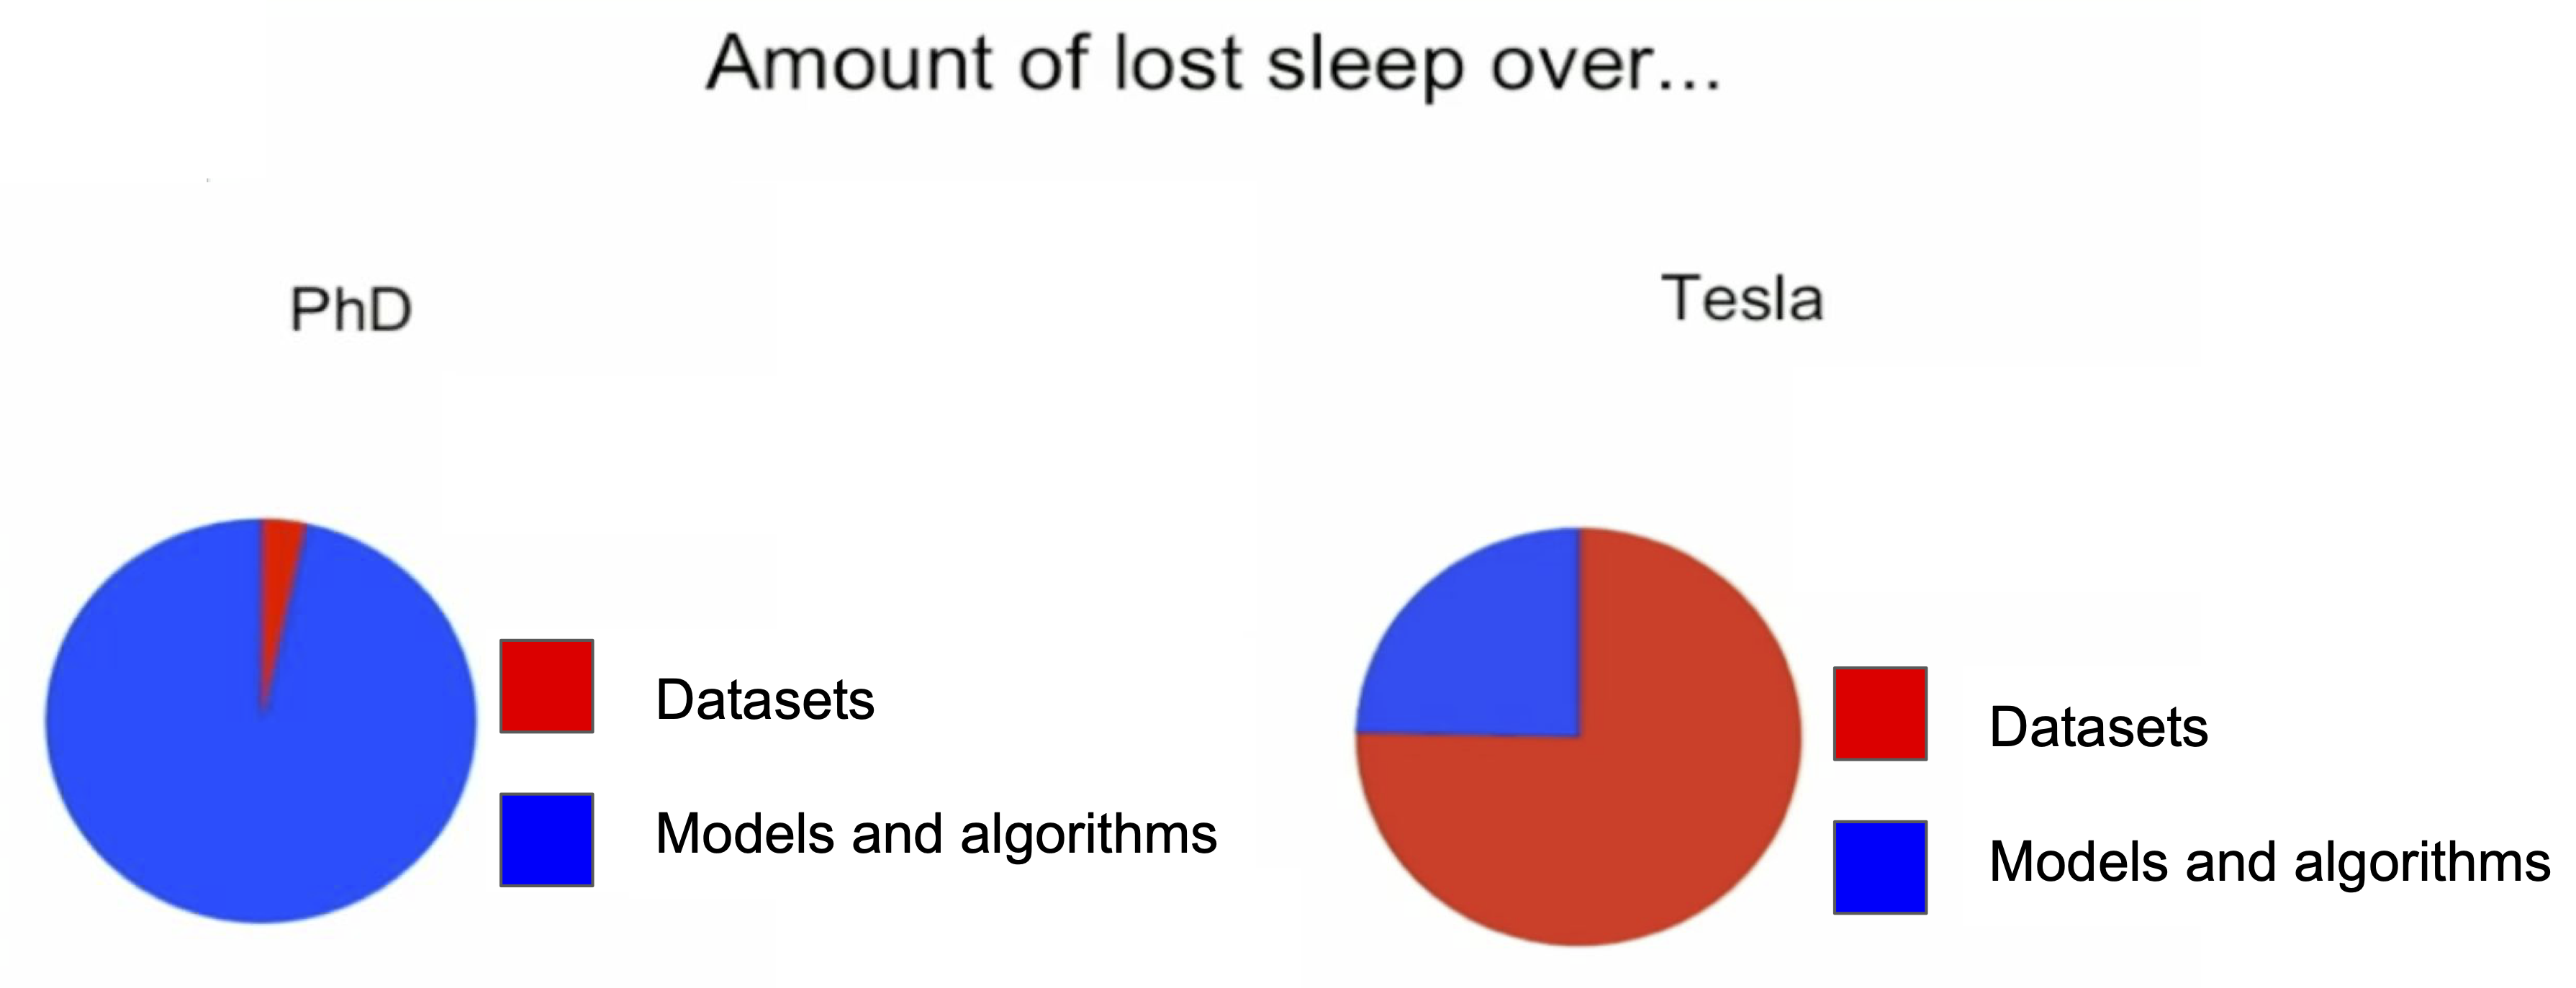 Amount of sleep lost over data in PhD vs at Tesla